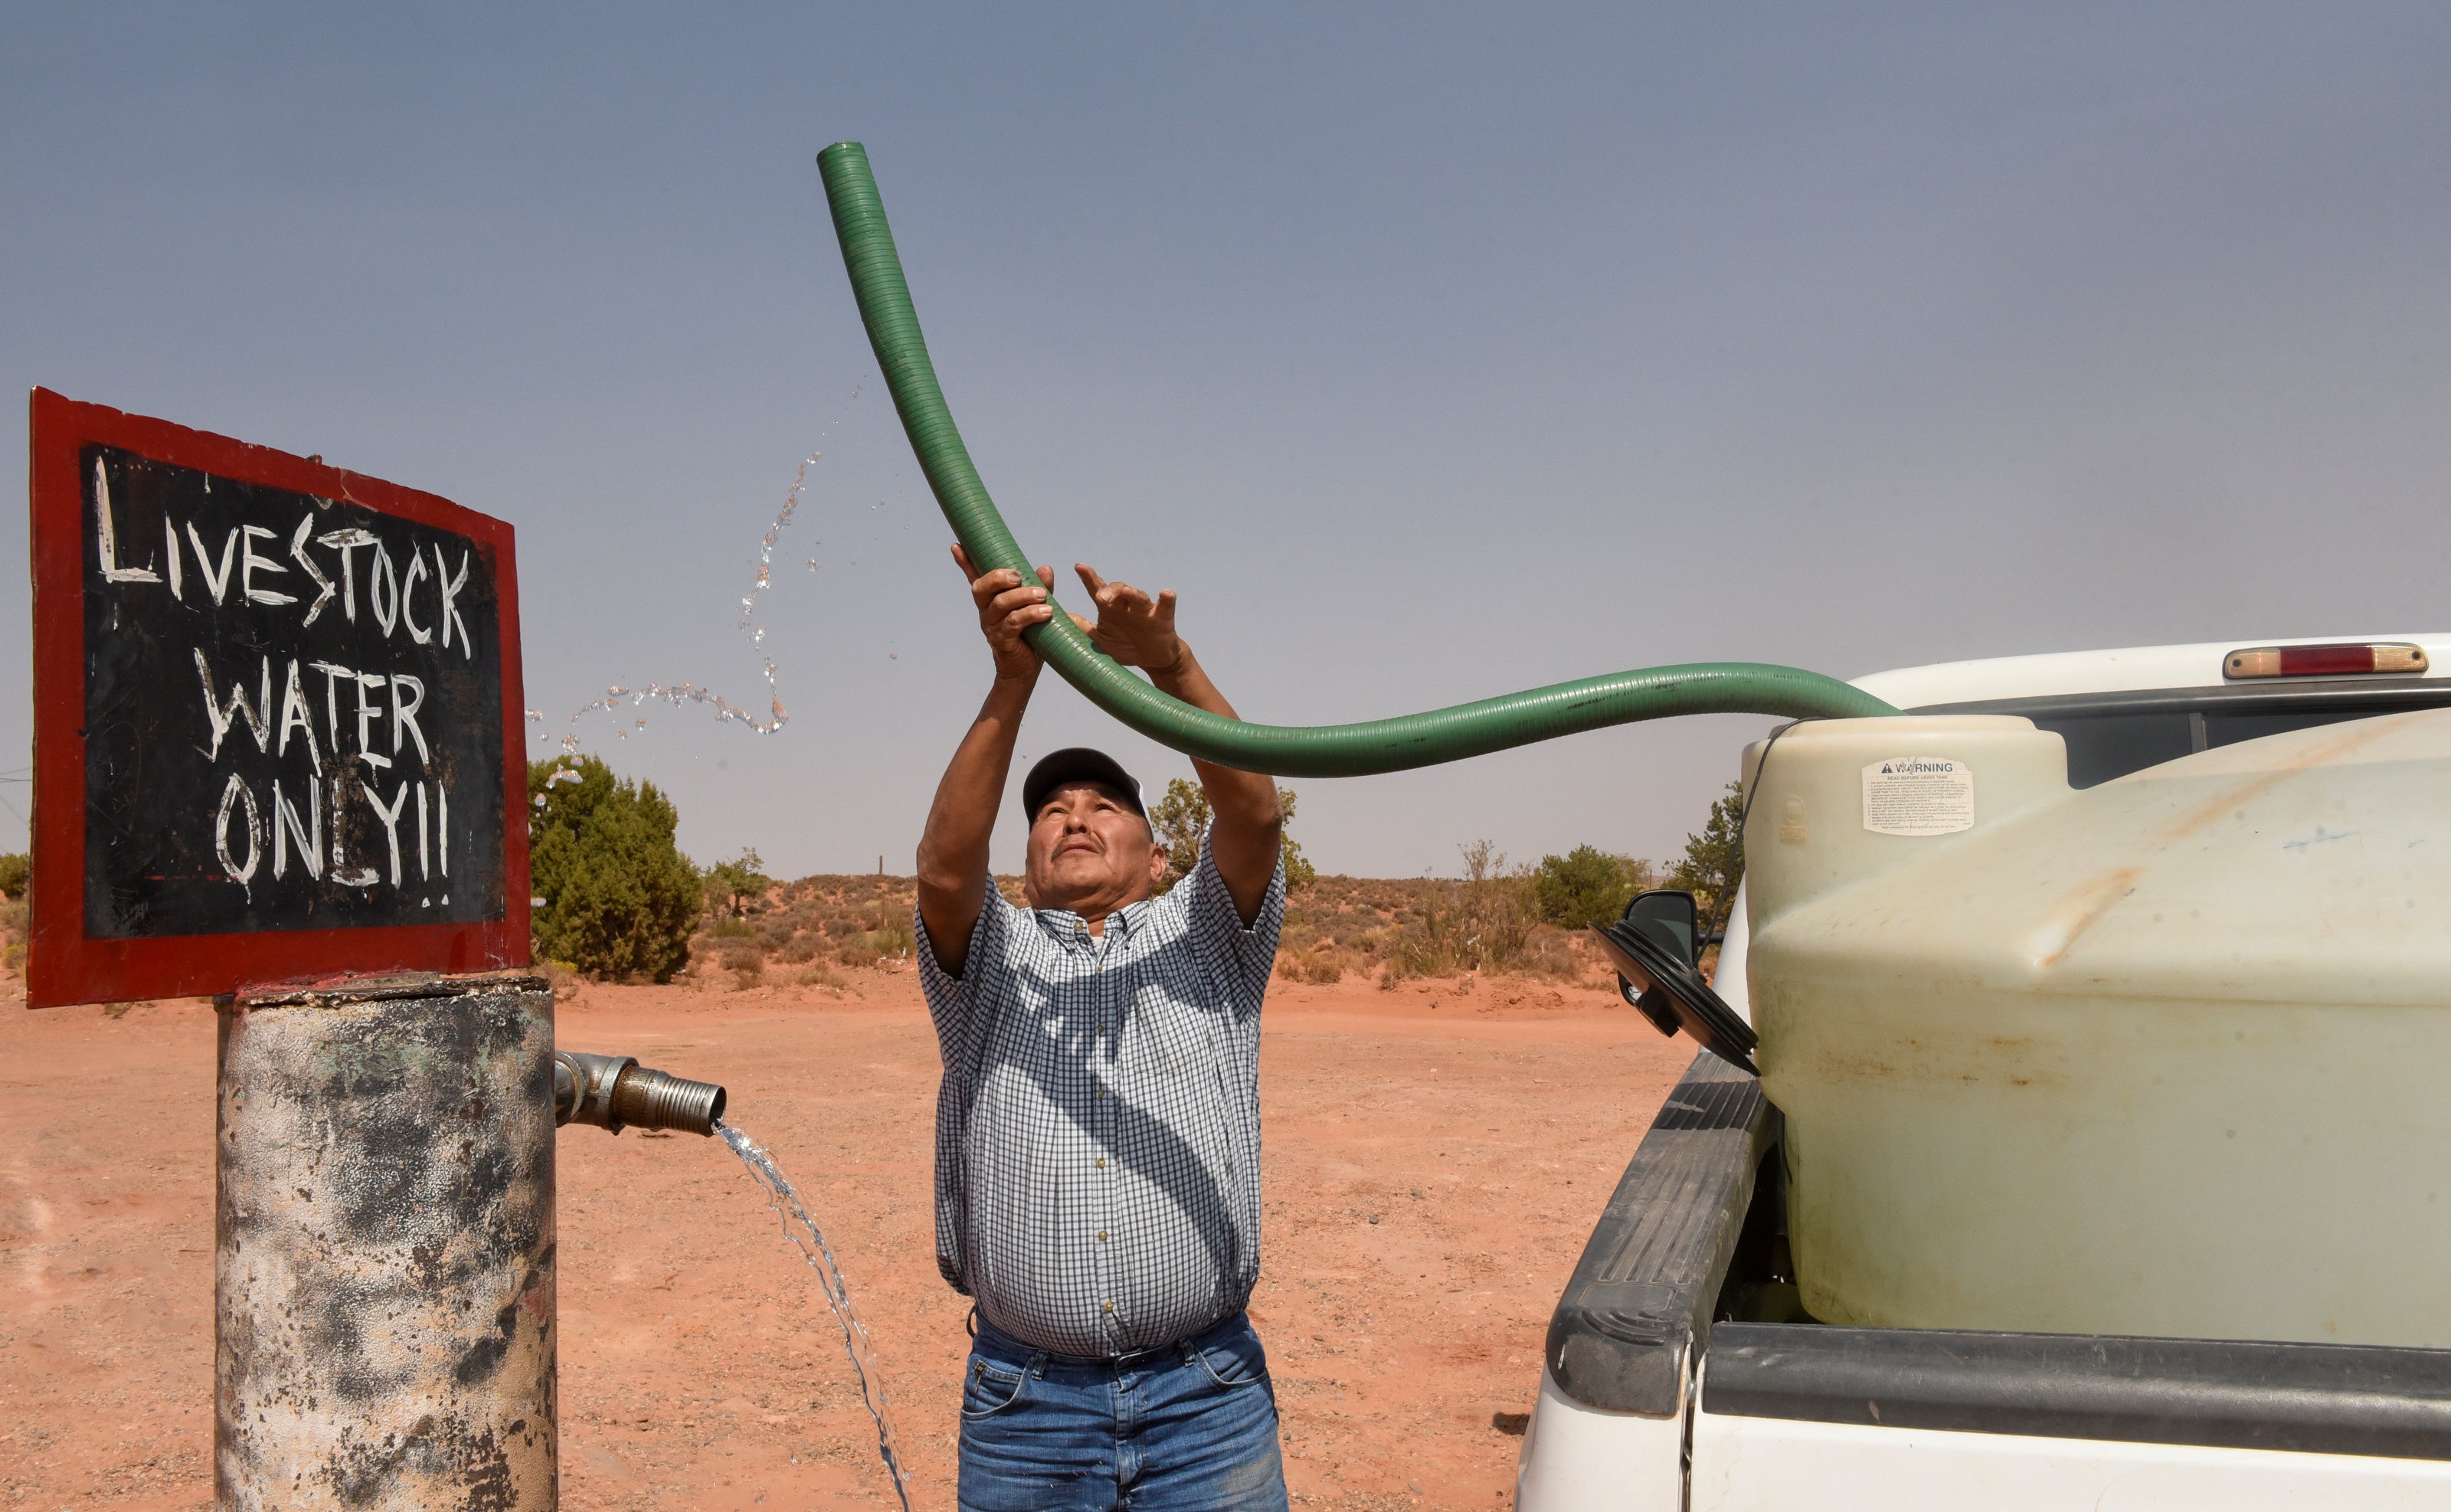 Eugene Boonie, 55, of the Navajo Nation fills up his water tank at a livestock spigot